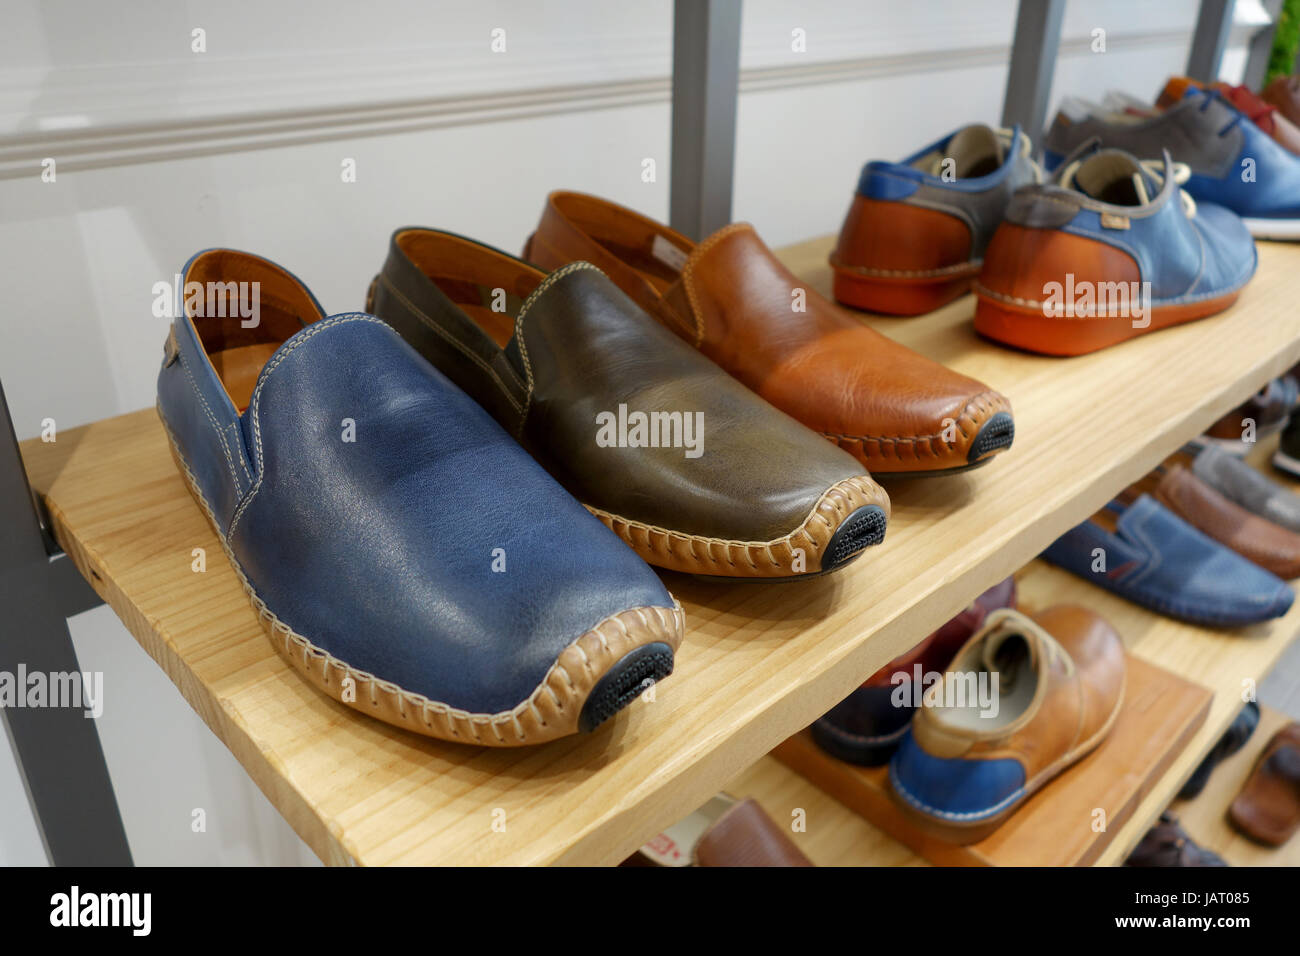 Pikolinos mens leather shoes on display in Spain Stock Photo - Alamy